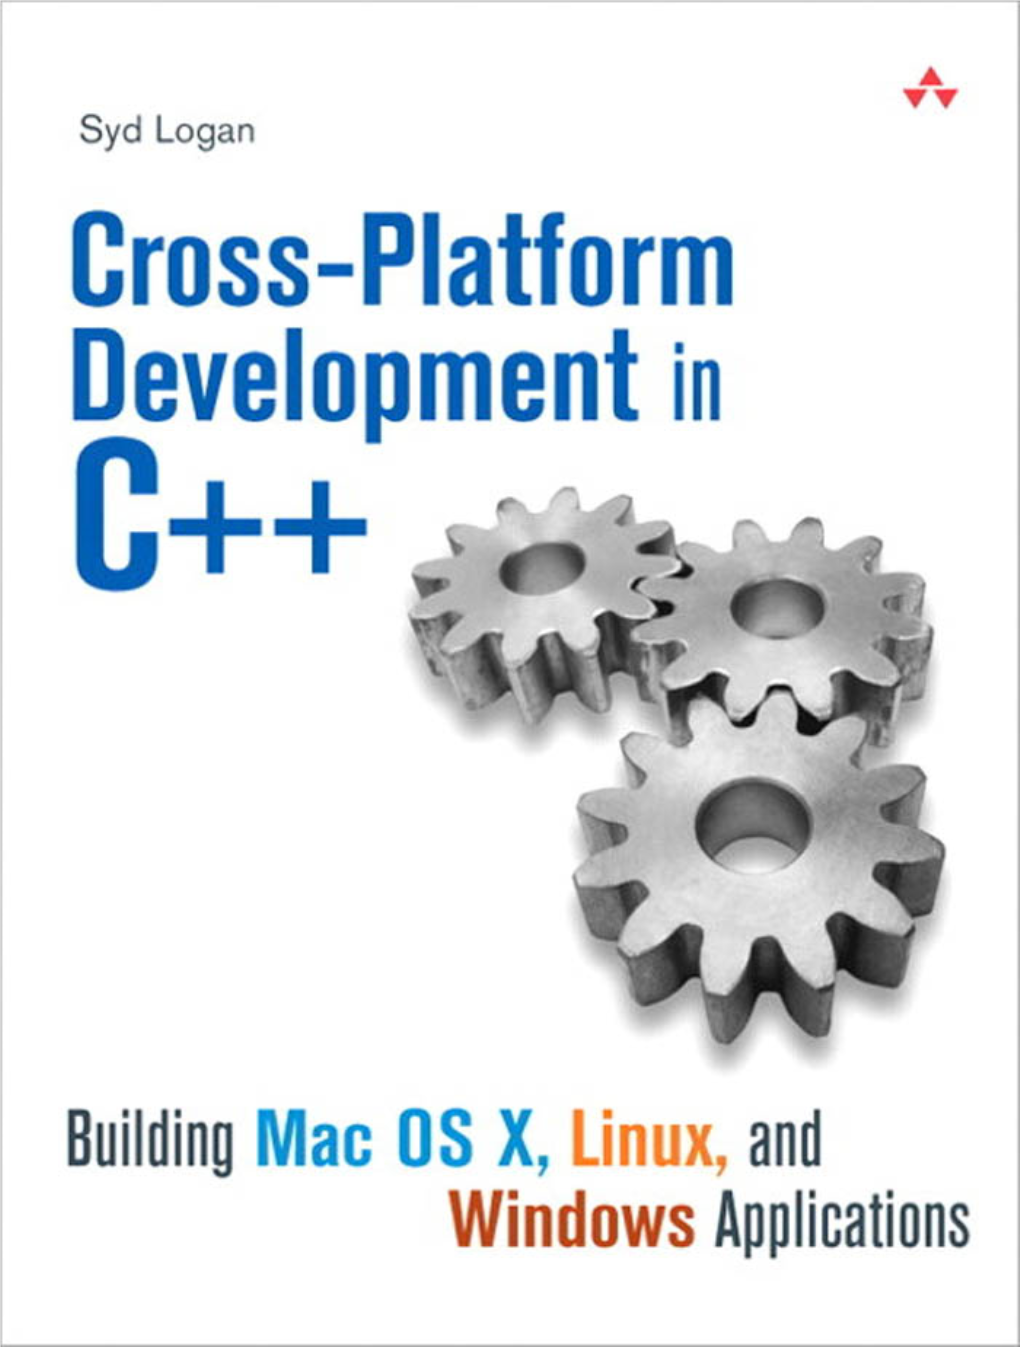 Cross-Platform Development in C++ This Page Intentionally Left Blank = Cross-Platform Development in C++ Building Mac OS X, Linux, and Windows Applications